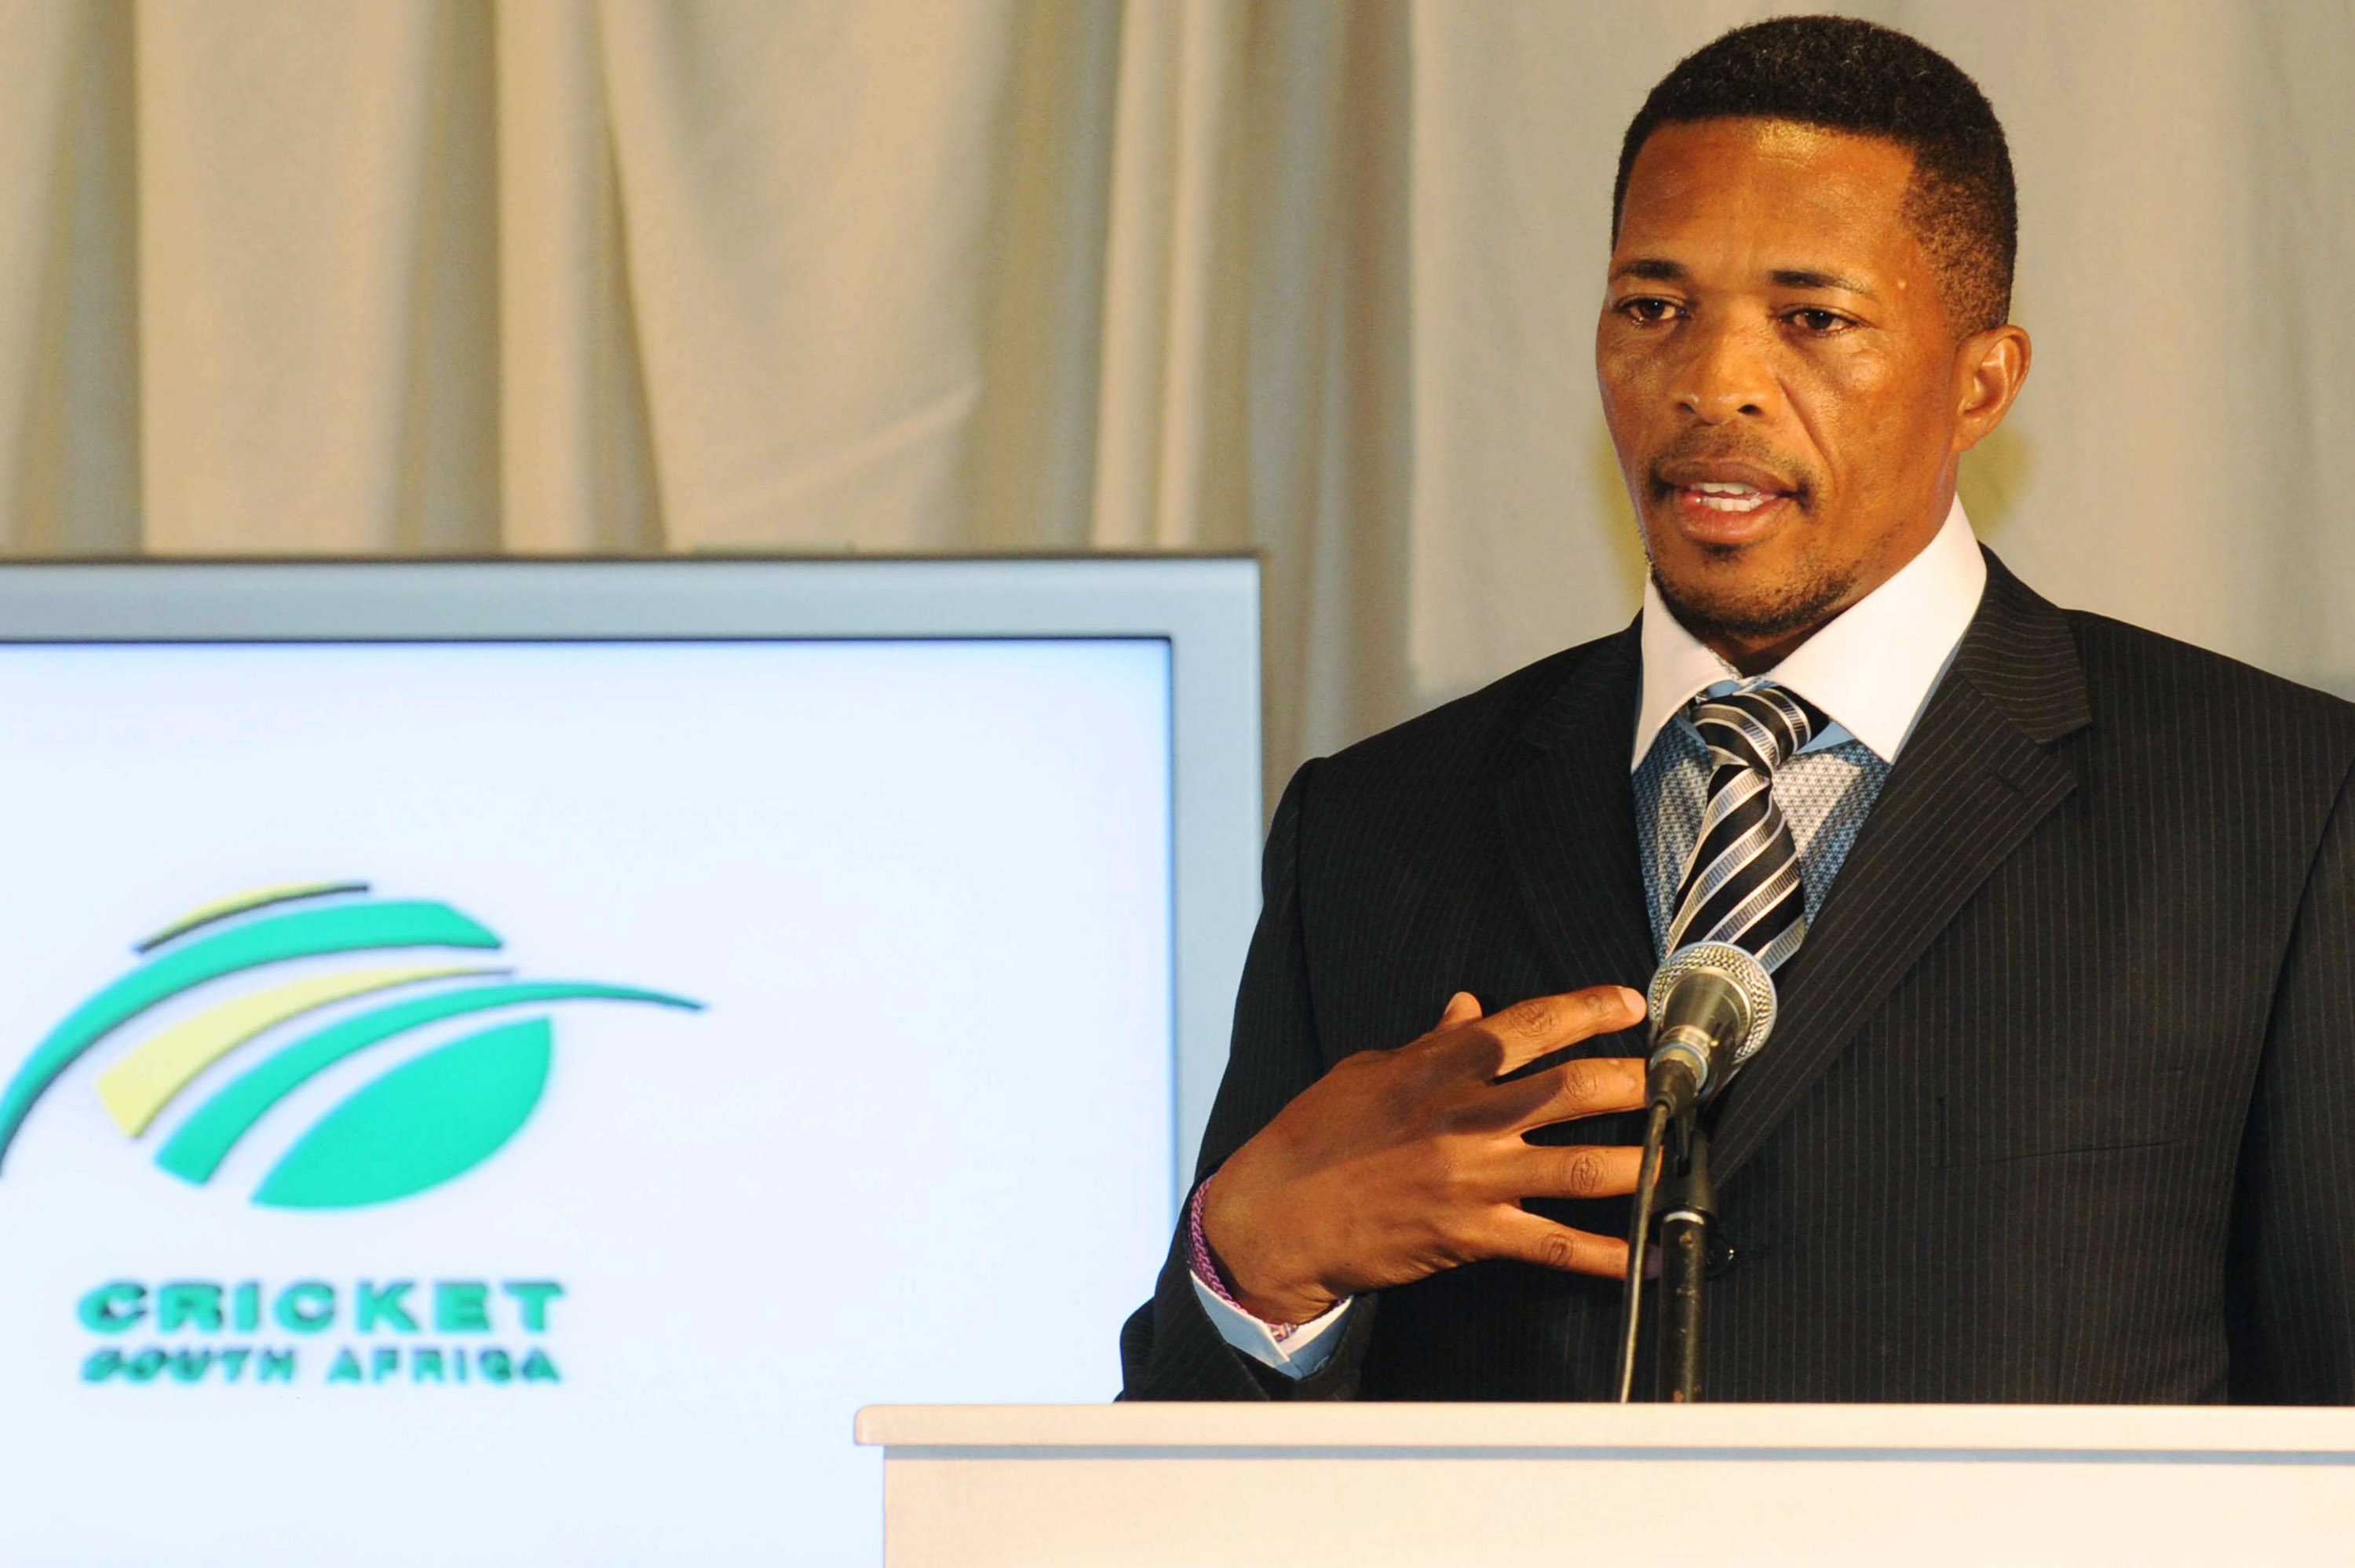 Was forever lonely during my time in South Africa team, reveals Makhaya Ntini